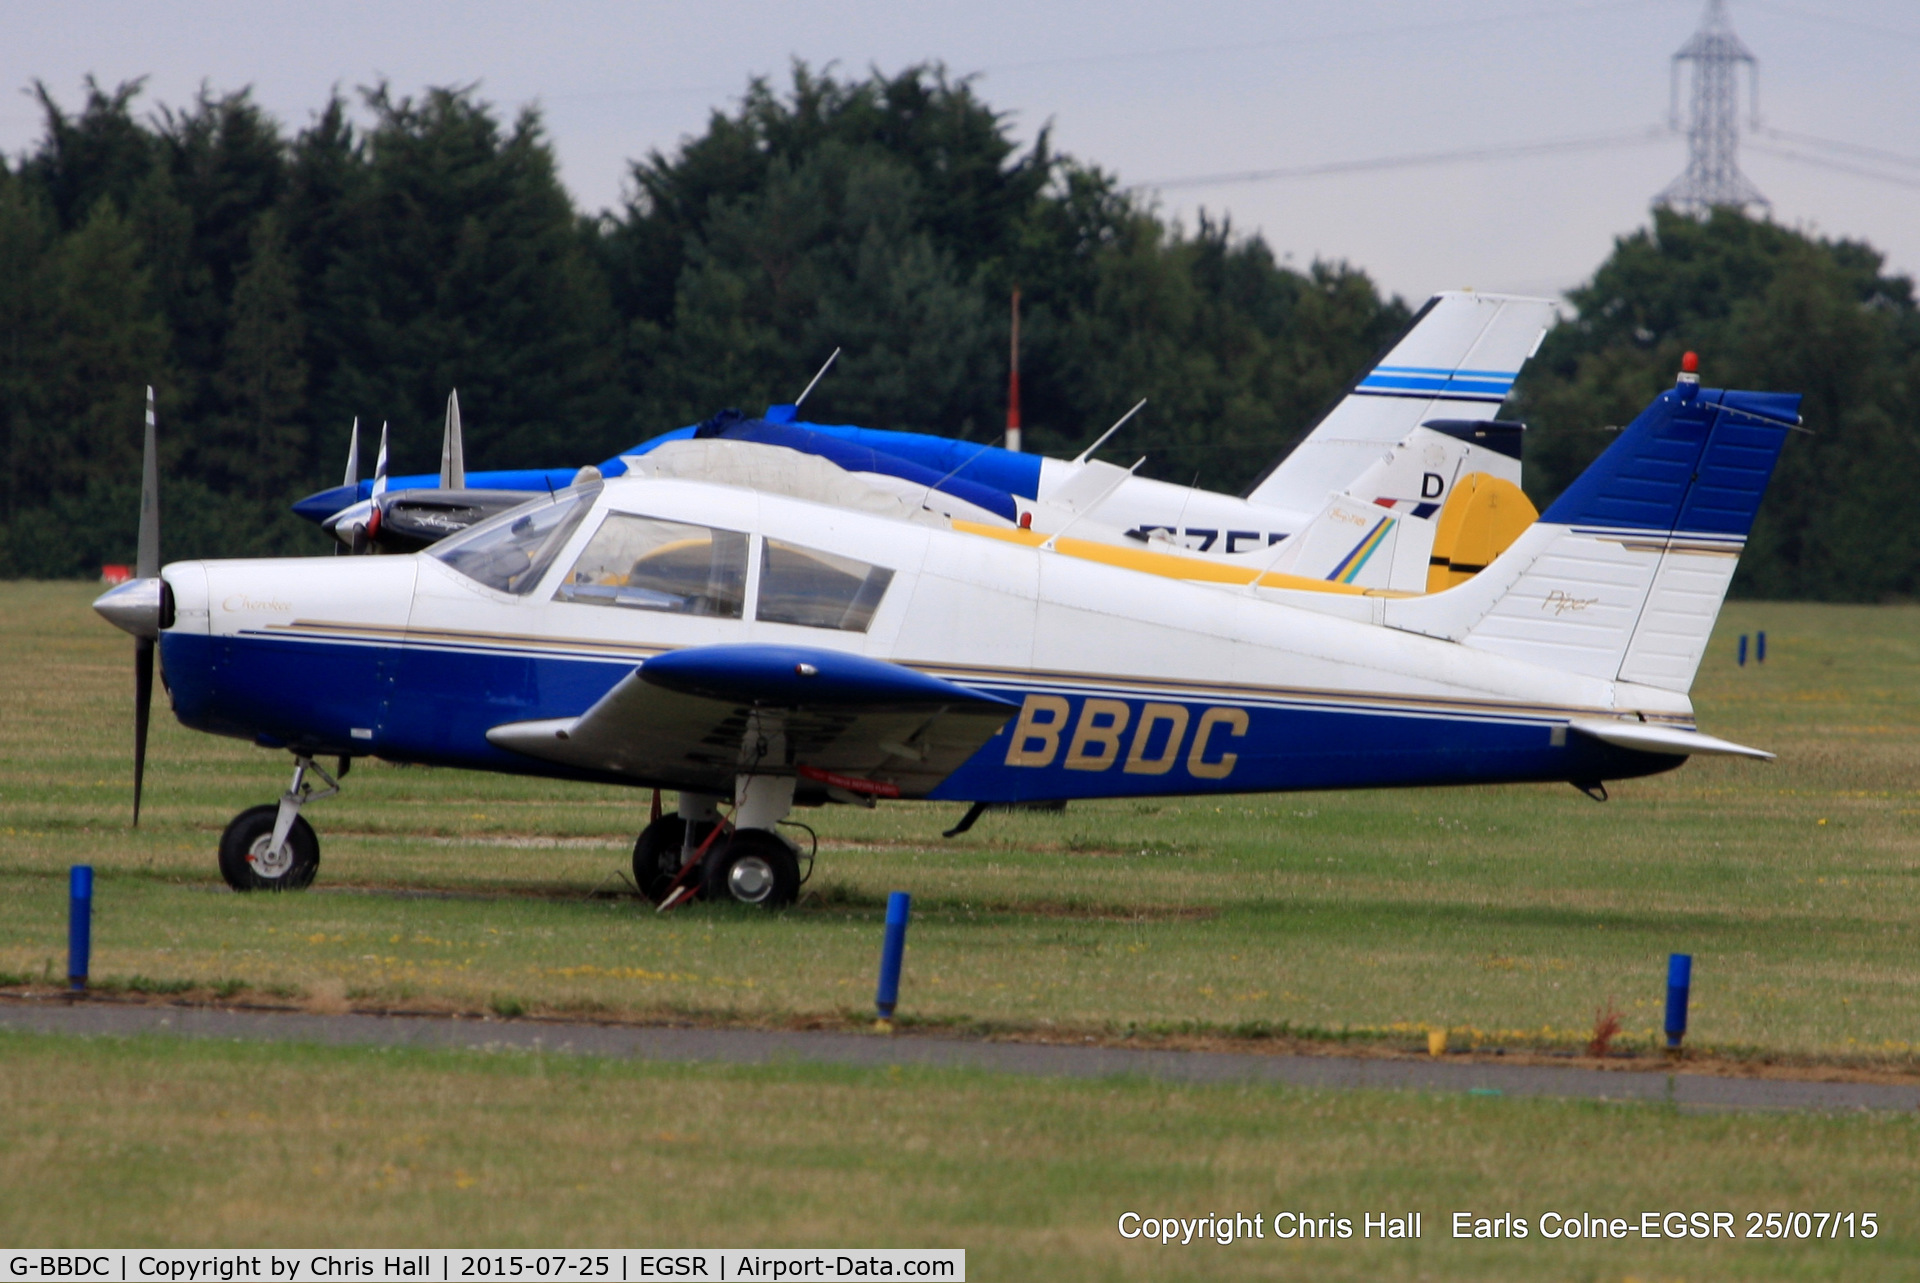 G-BBDC, 1973 Piper PA-28-140 Cherokee C/N 28-7325437, at Earls Colne Airfield